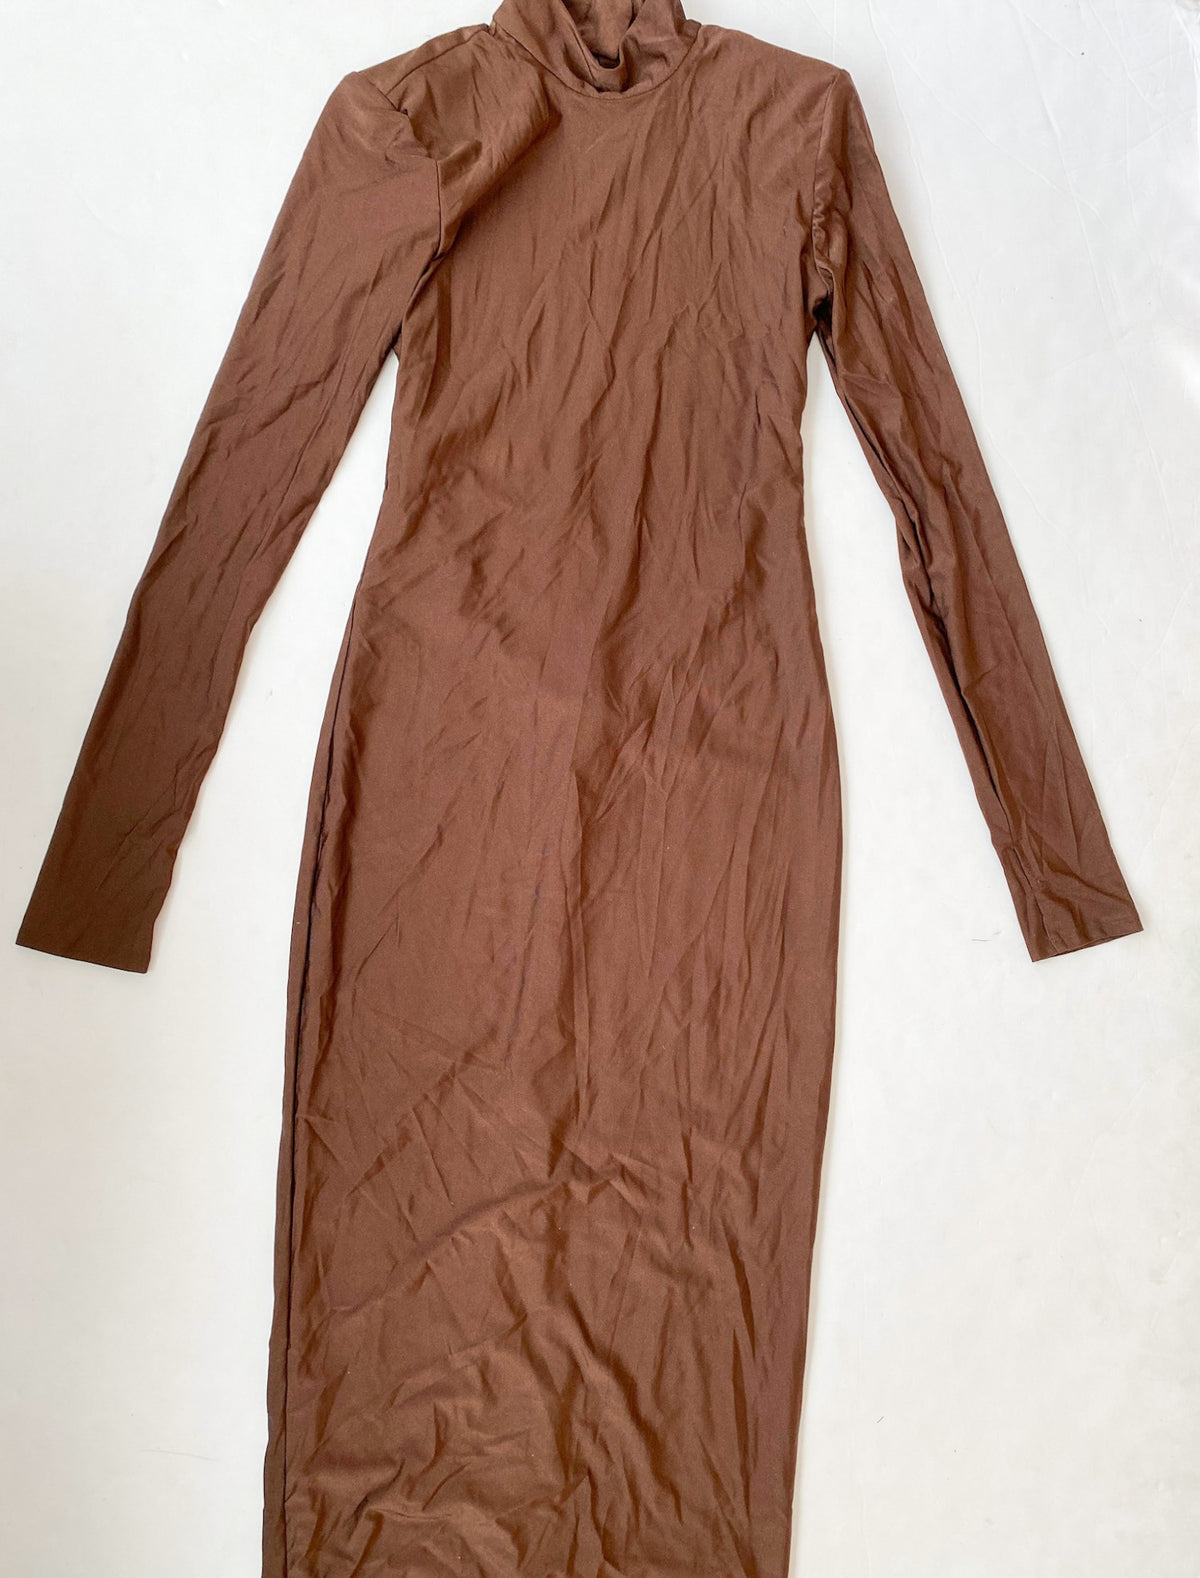 Revolve Brown Long Sleeve Maxi Dress with Open Back - NEW WITH TAGS